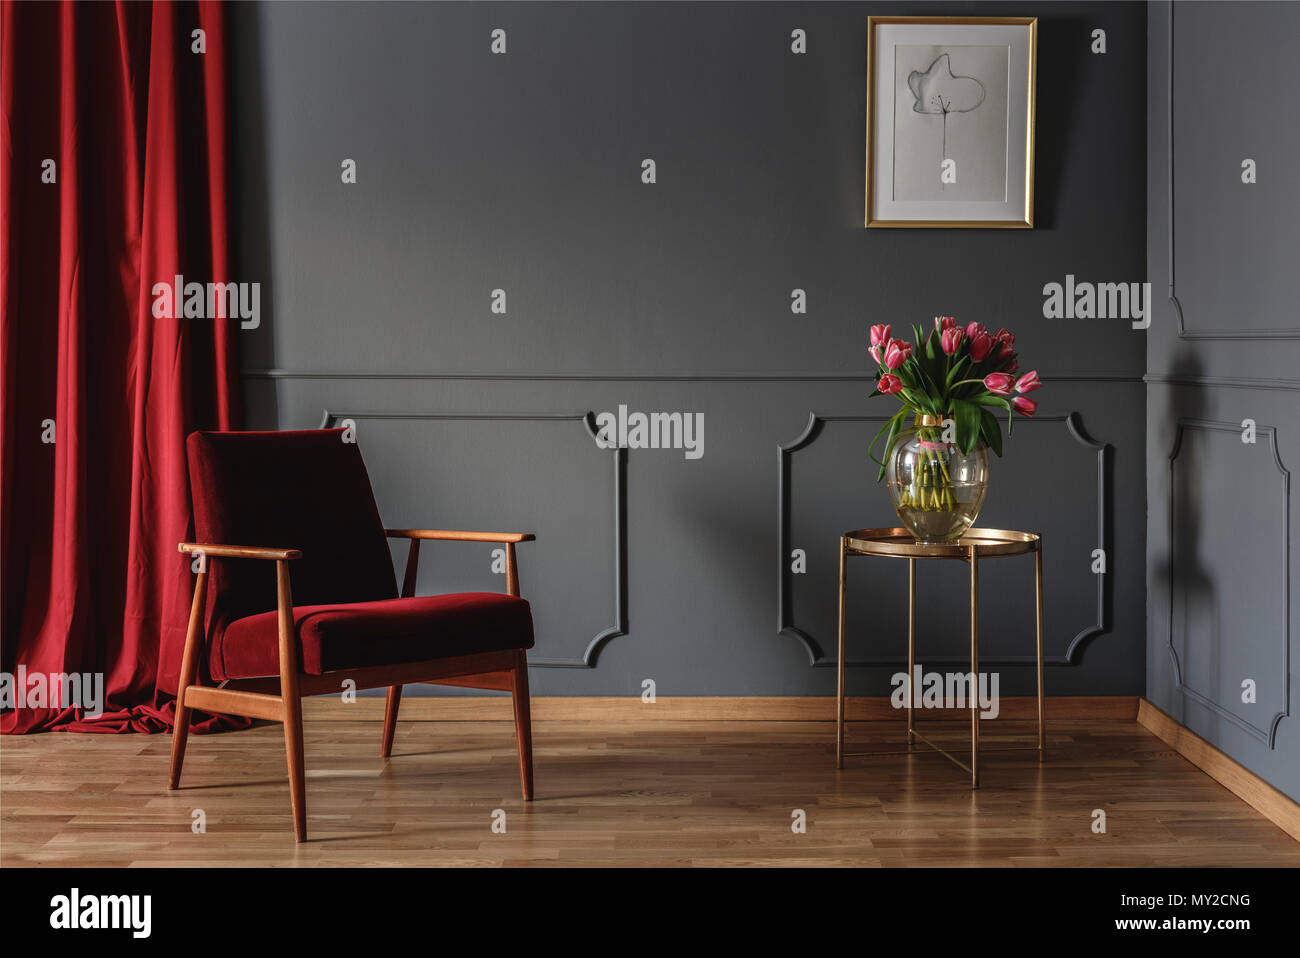 Simple waiting room interior with a single red armchair standing against dark gray wall with molding next to a golden table with pink flowers. Real ph Stock Photo